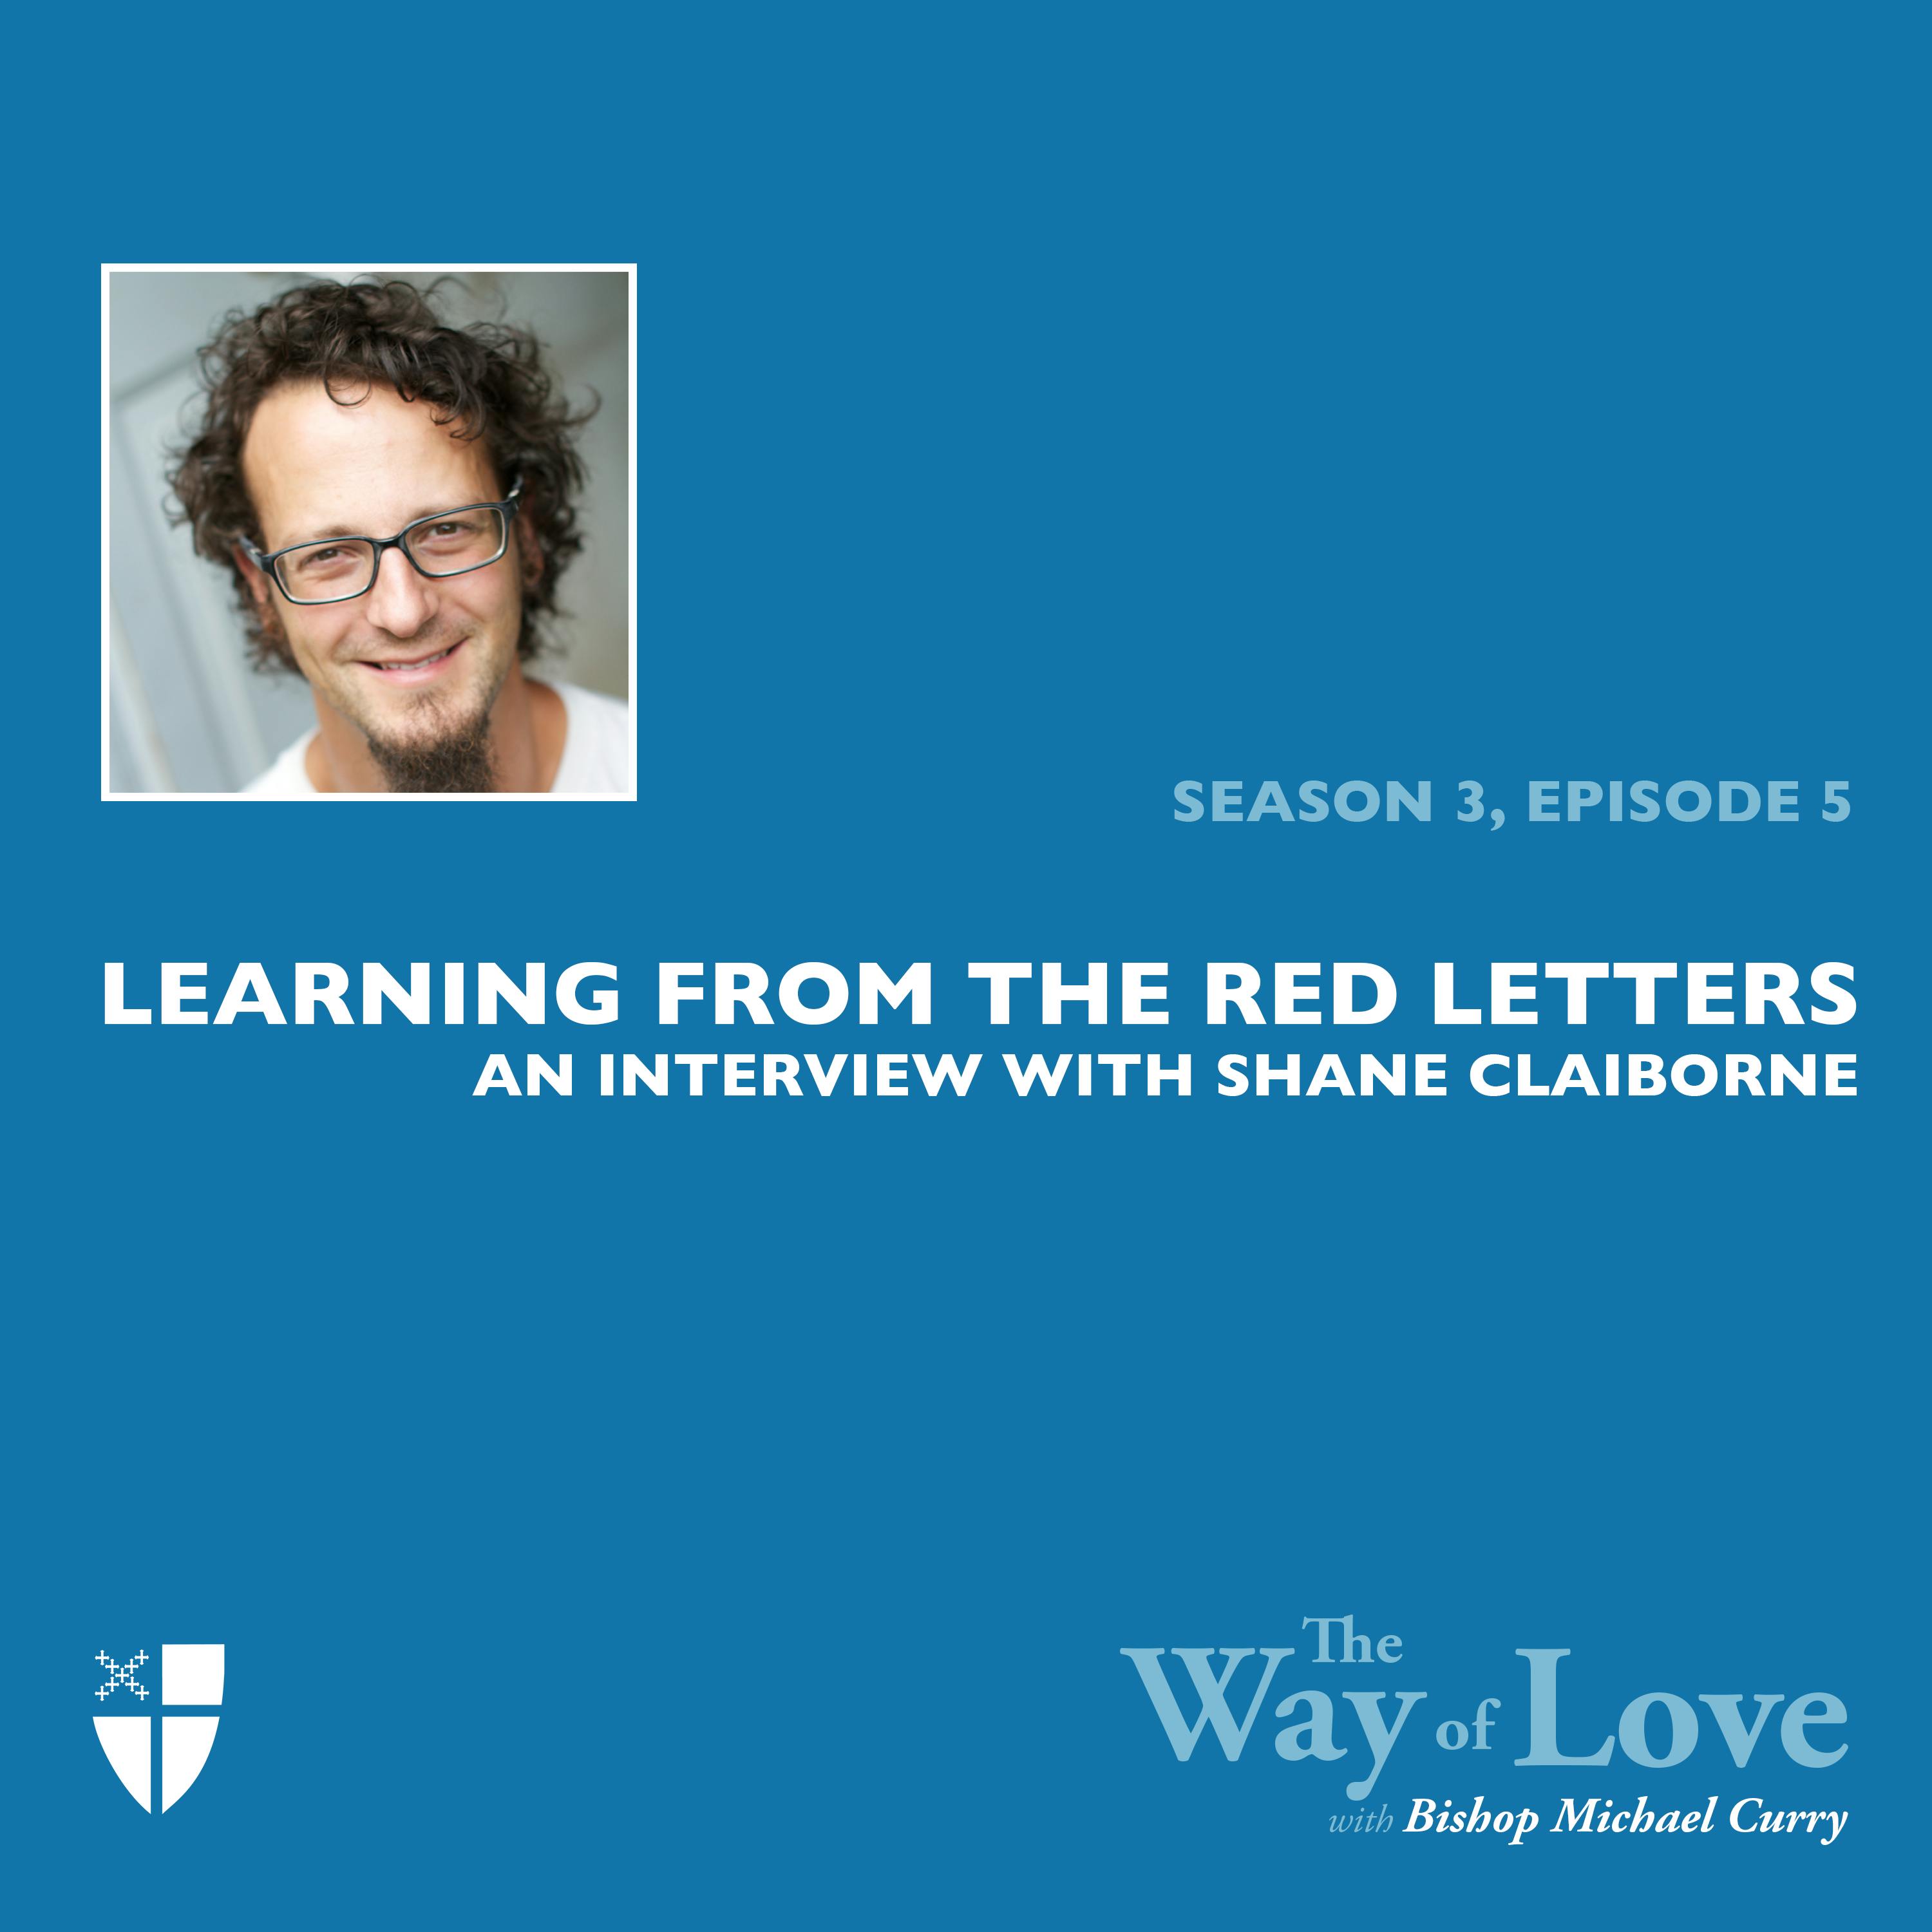 Learning from the Red Letters with Shane Claiborne